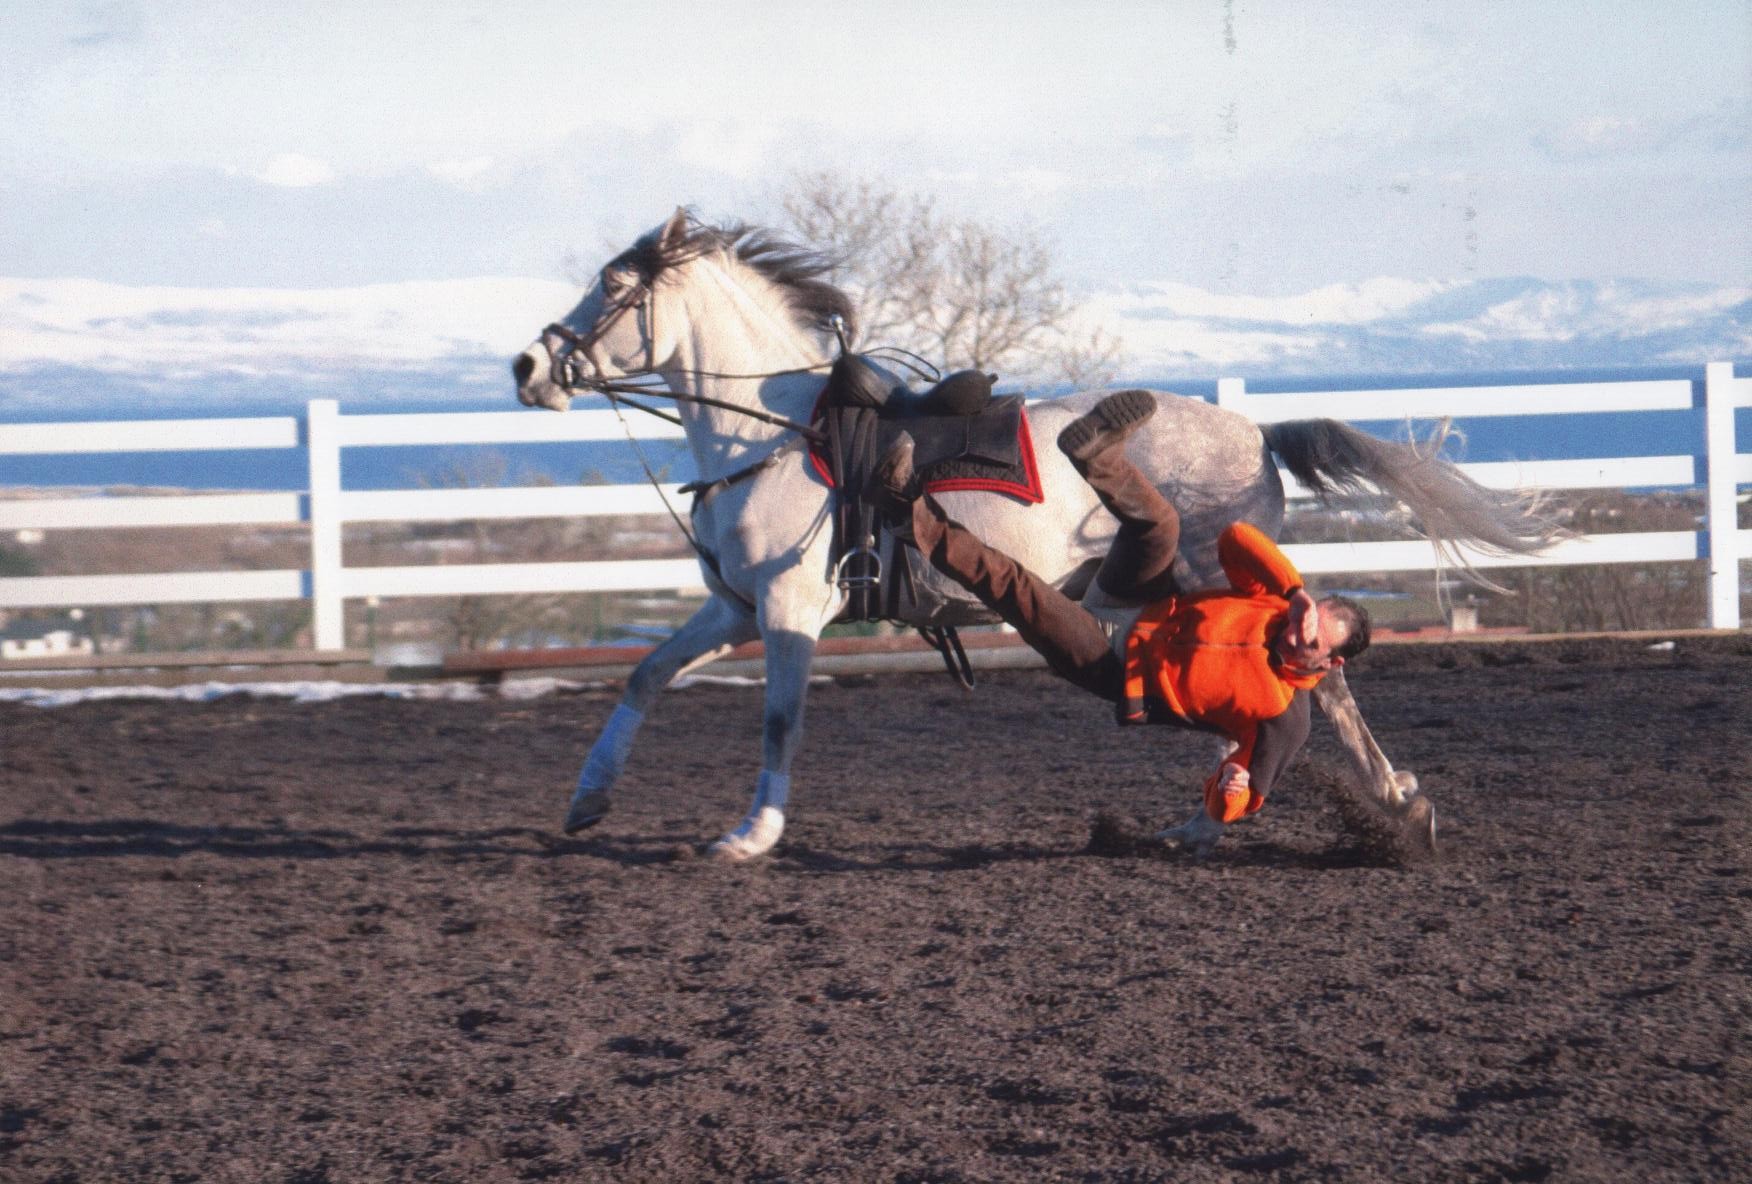 Dylan demonstrating a Saddle fall